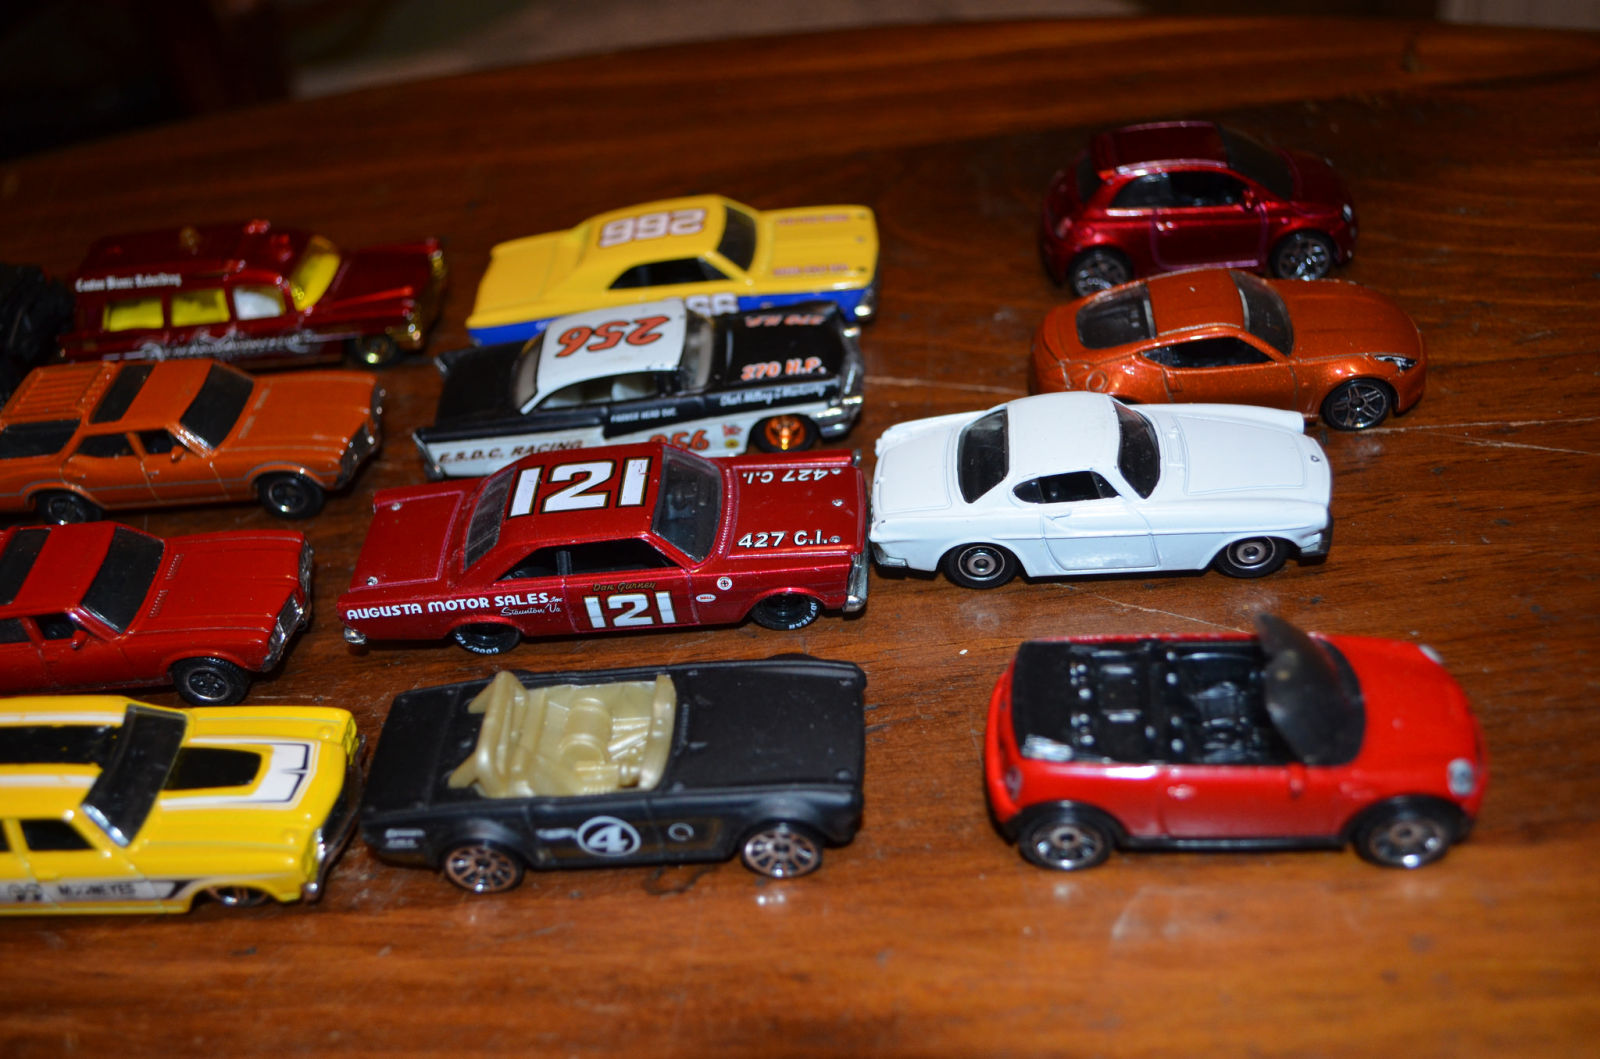 The three vintage race cars were what made this lot a must-have. I don’t know why, but I became obsessed the moment I saw them.